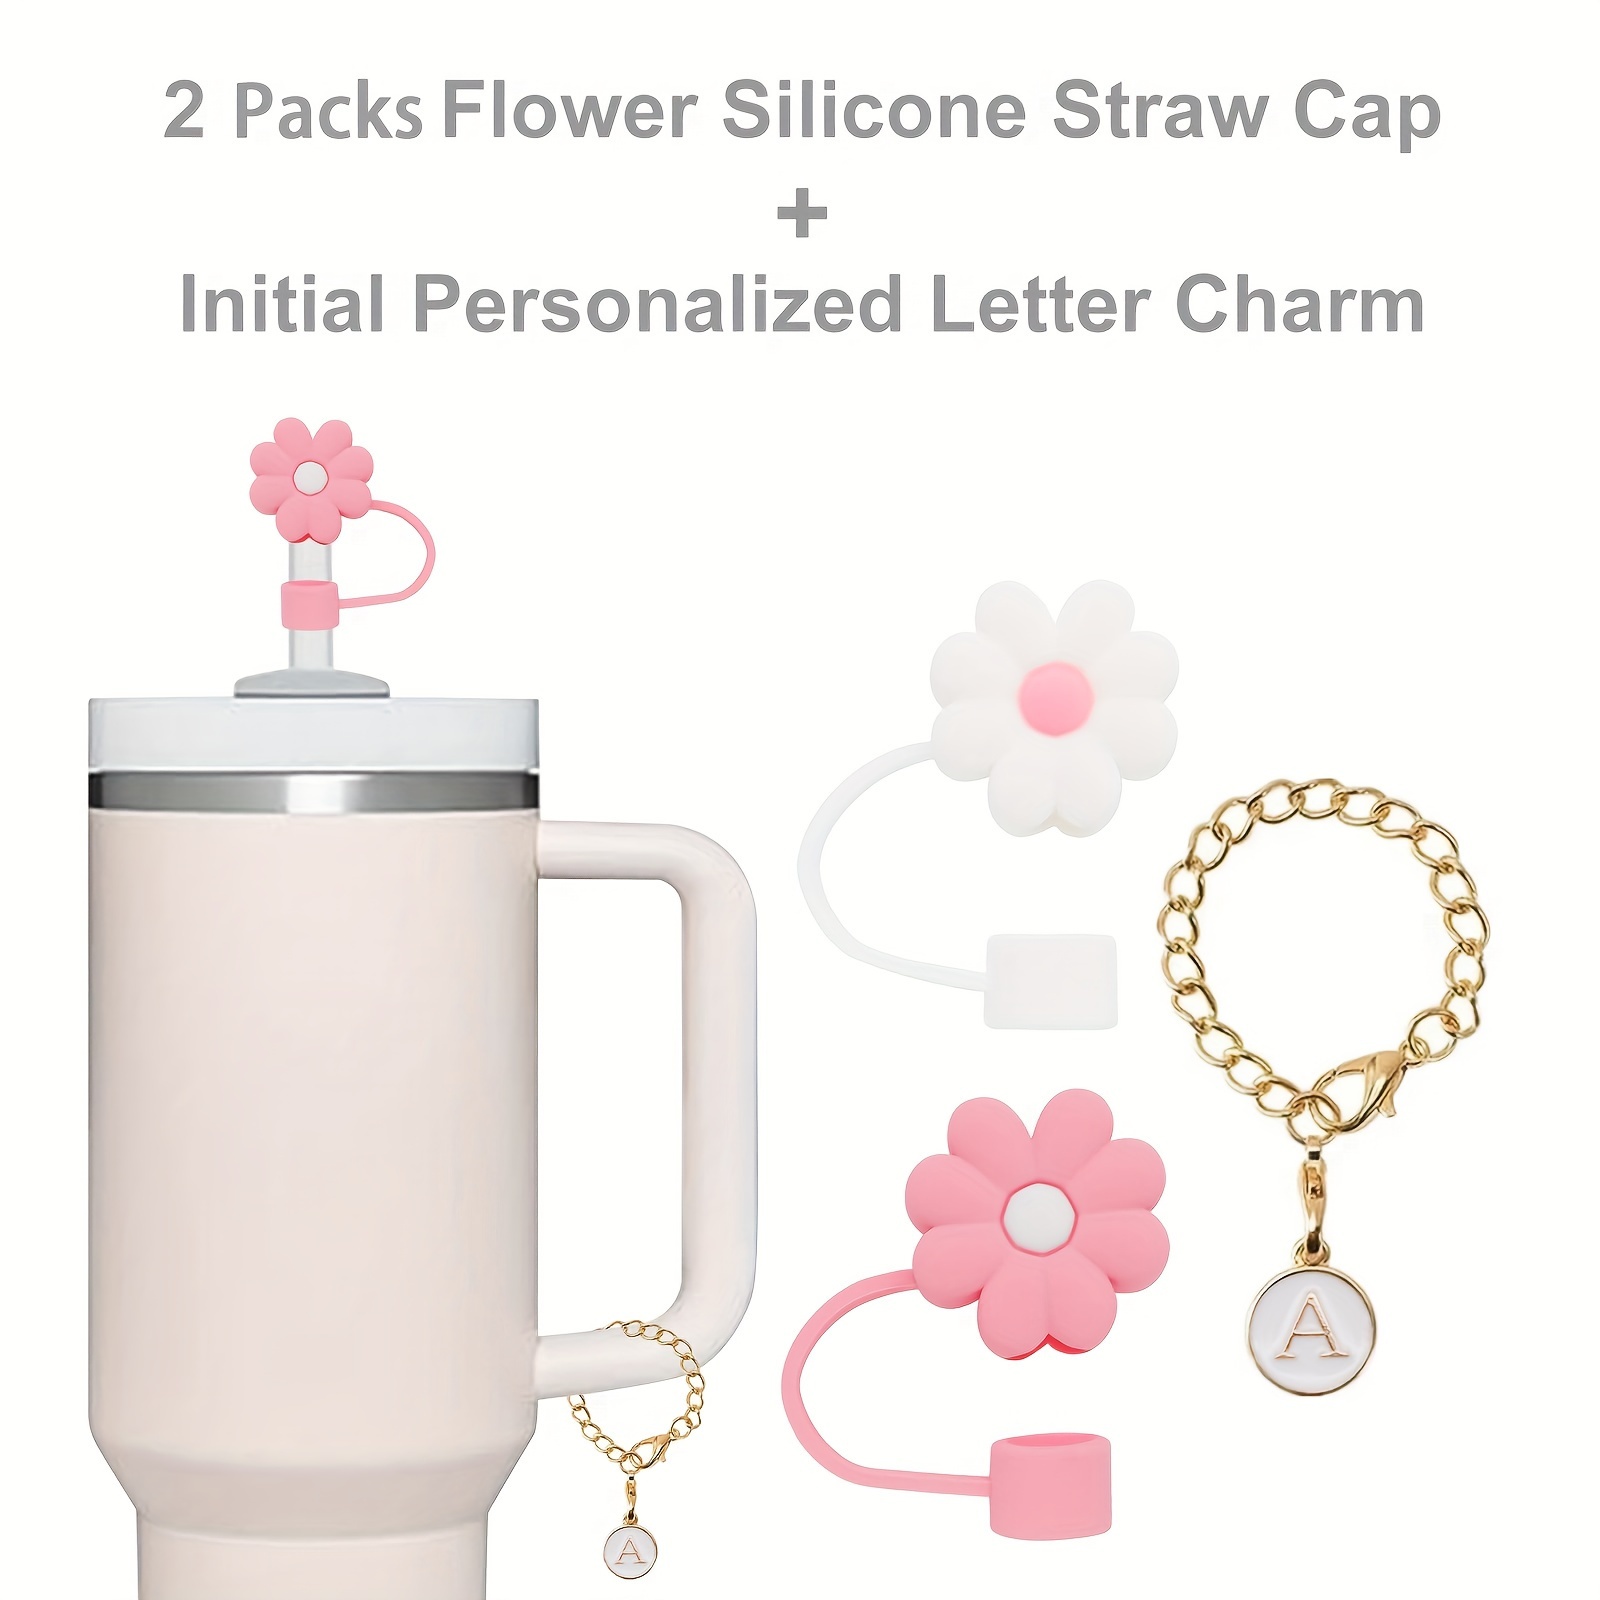 Stanley Straw Topper and Straw Charm Set, Straw Top Protector, Straw Tip  Cover, Straw Cover, Stanley Cup Accessories 